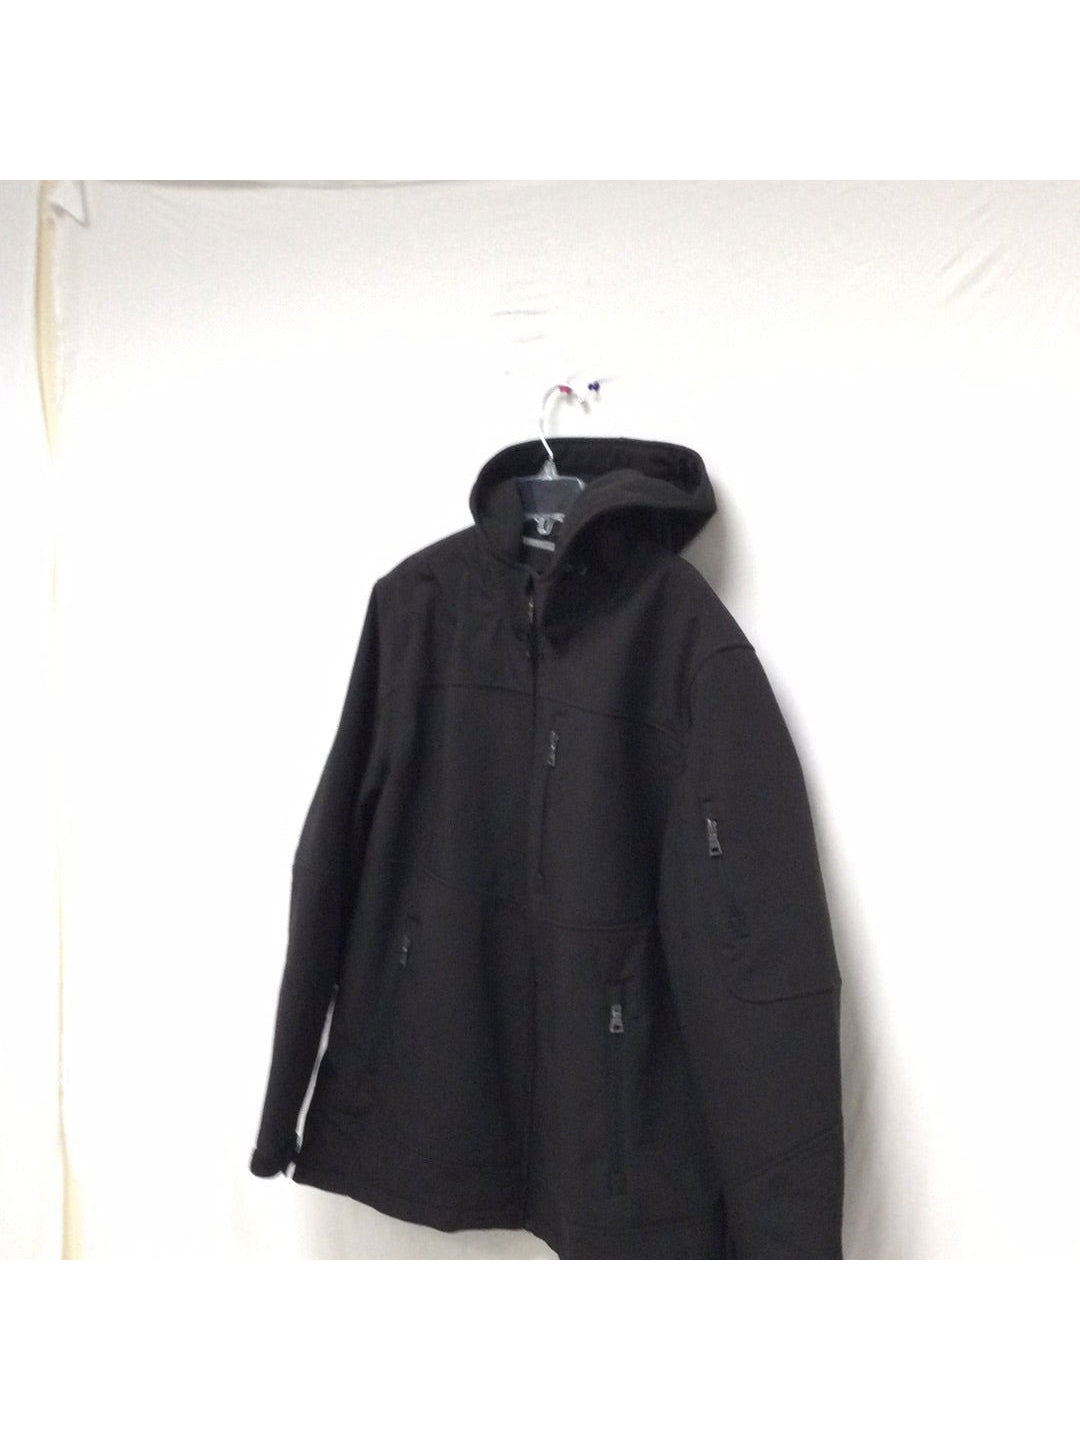 Guess Women XXL Black Jacket - The Kennedy Collective Thrift - 